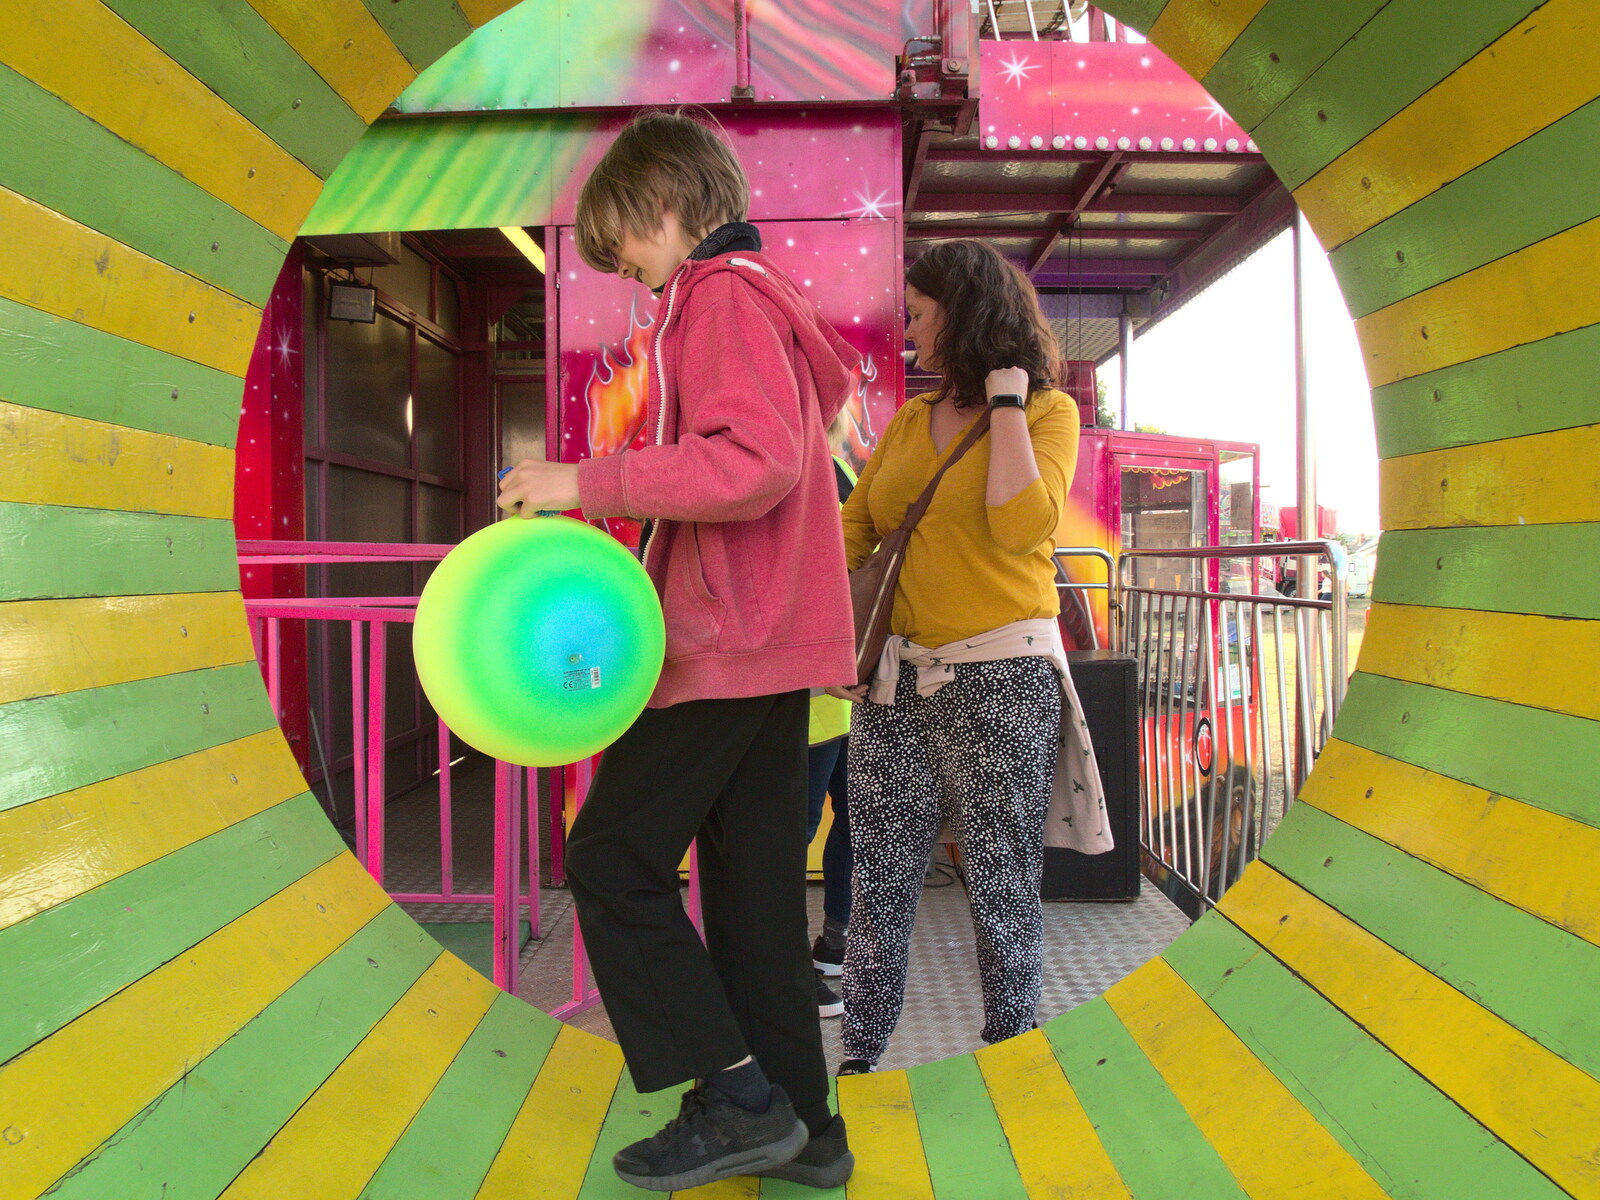 Harry and Isobel exit the funhouse from A Few Hours at the Fair, Fair Green, Diss, Norfolk - 5th September 2021